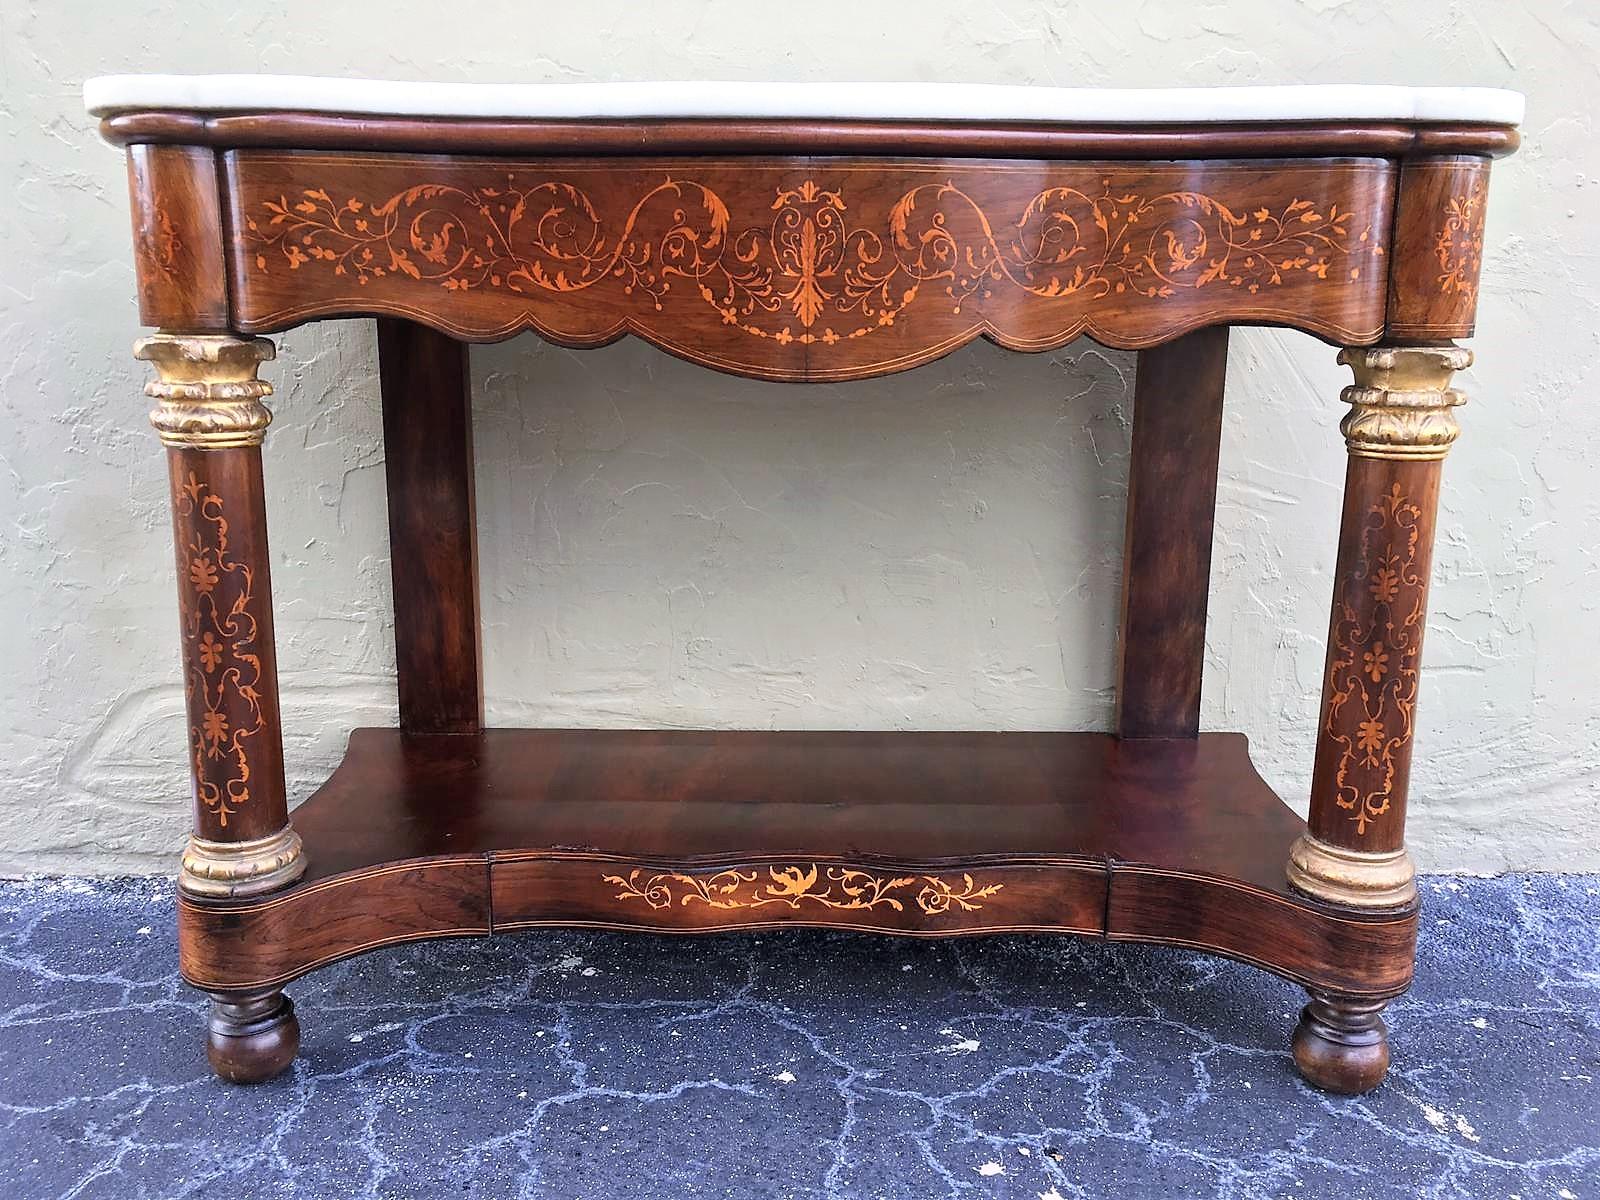 Early 19th century console in wood veneer with a white marble top. It features beautiful marquetry of rinceaux and floral motifs. It is resting on two straight legs in the back and two front columns legs. The console is set on a large base with one